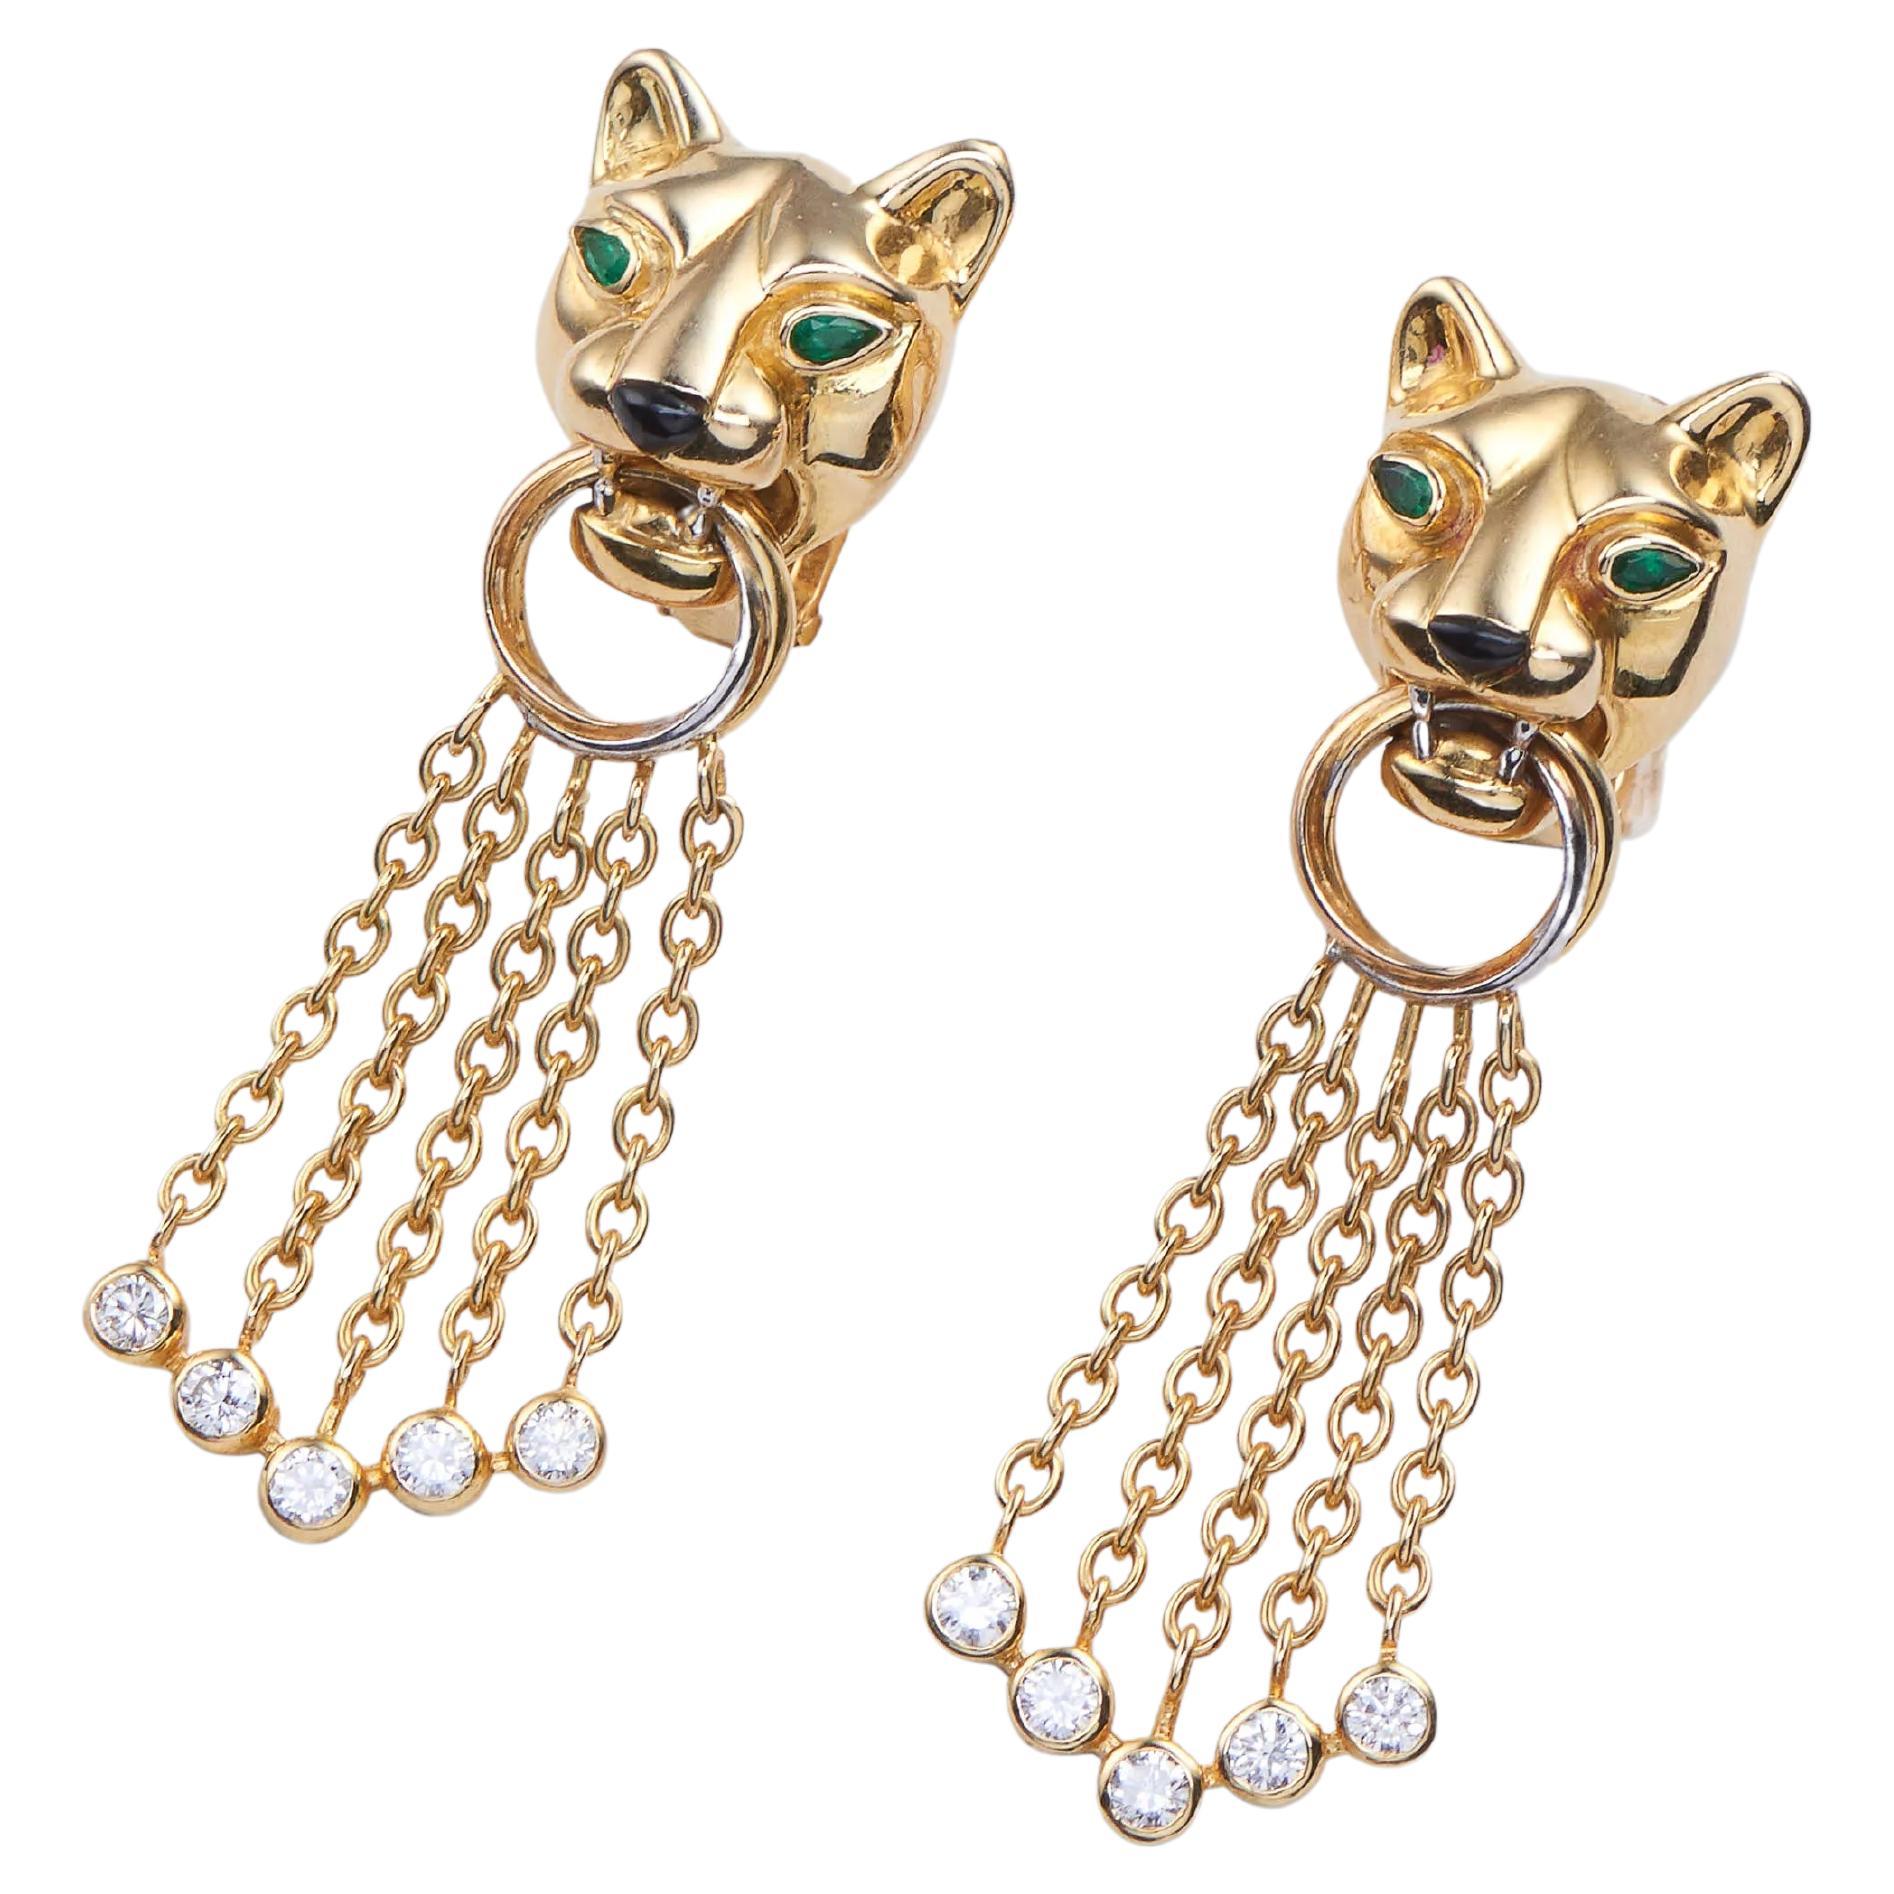 Cartier 18K Yellow Gold Diamond, Emerald, Onyx and Bead ‘Panthère’ Earrings